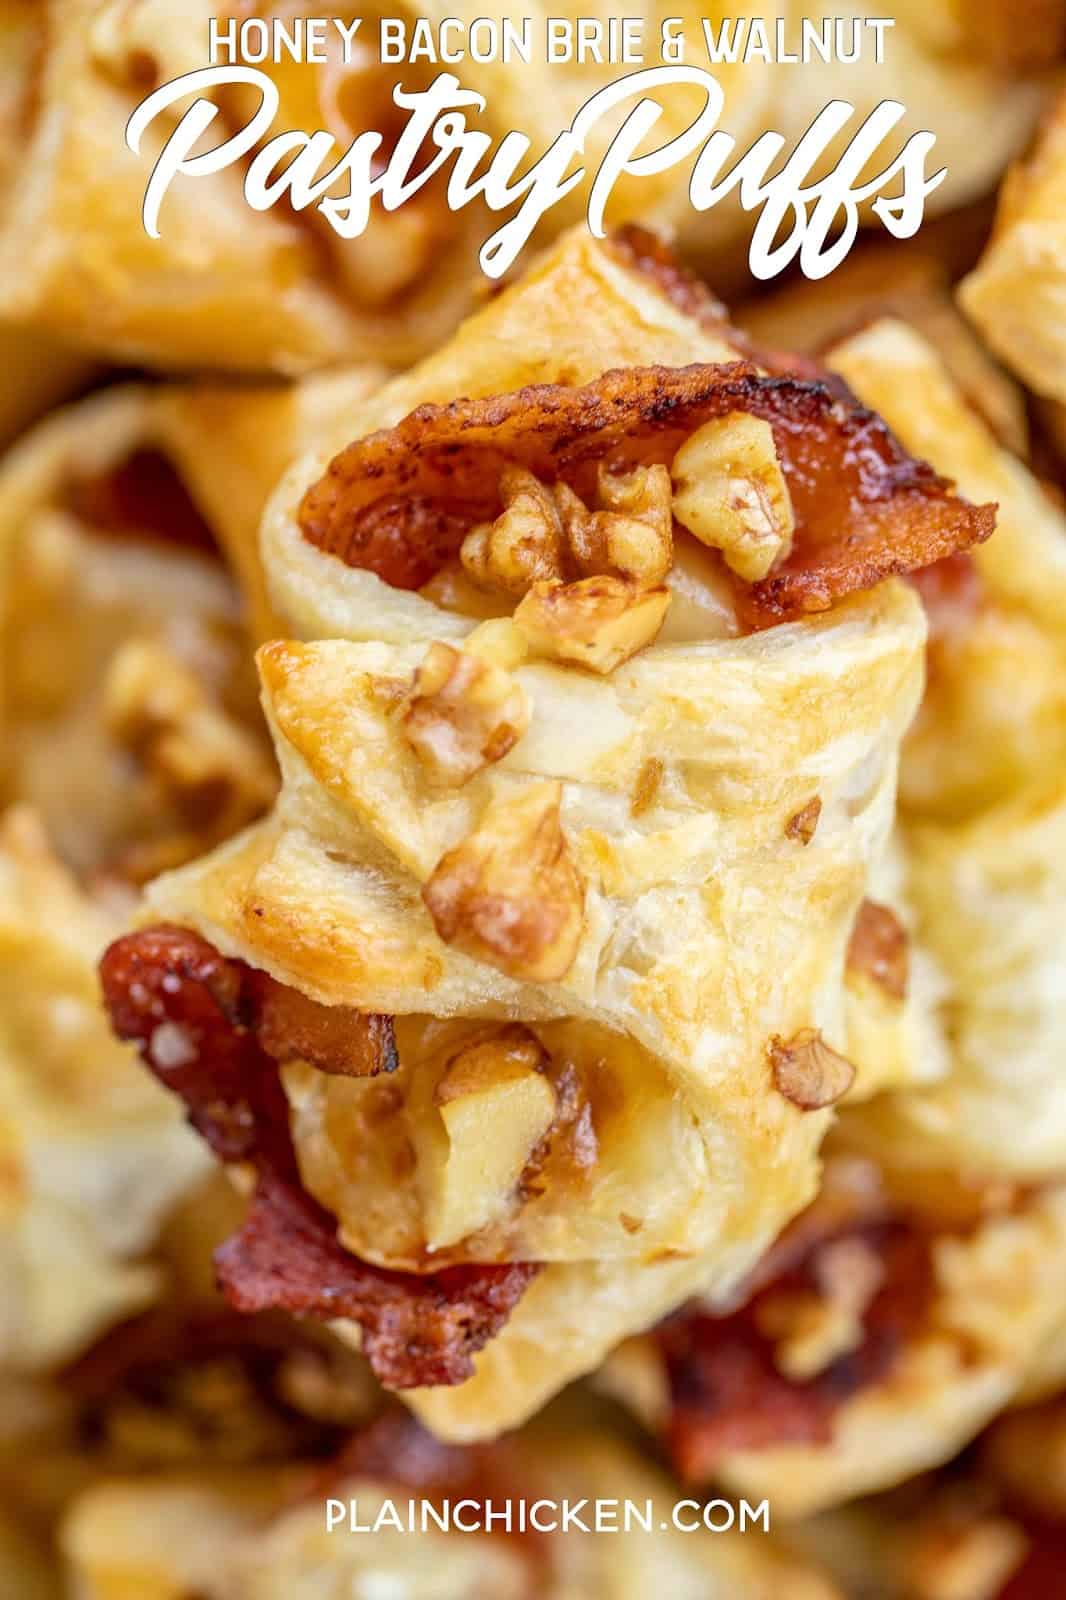 Honey Bacon Brie and Walnut Pastry Puffs recipe - sweet and salty goodness!!! The flavor combination is totally addicting. Can make the bites ahead of time and refrigerate or freeze until ready to bake. Great for all your holiday parties and tailgating!! You might want to double the recipe - these pastry puffs don't last long!! #appetizer #tailgating #brie #bacon